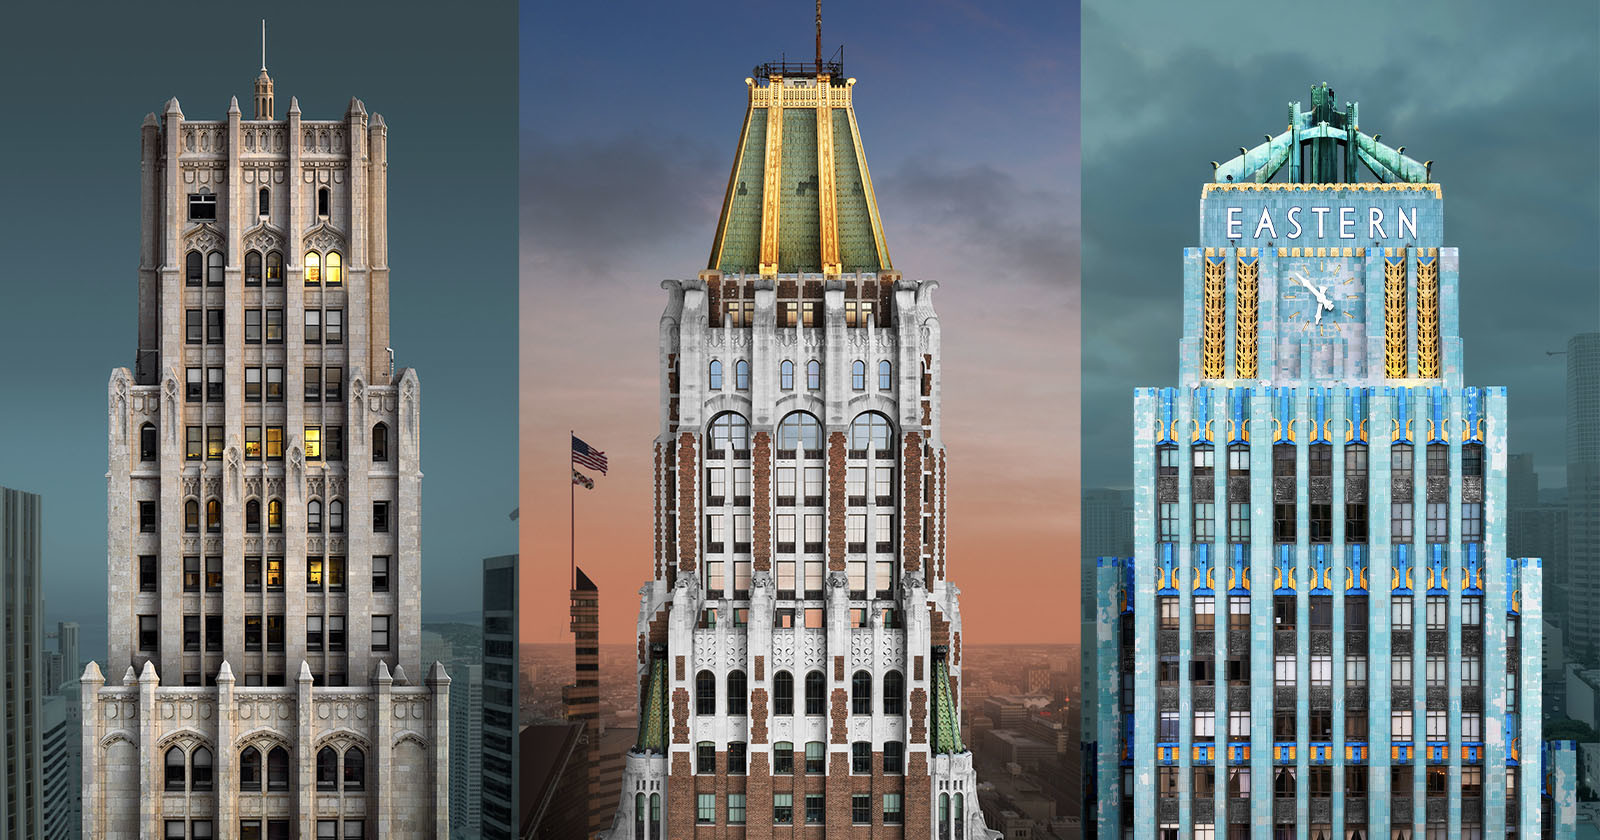 Photographers Stunning Images of US Buildings Are Captured on a Drone